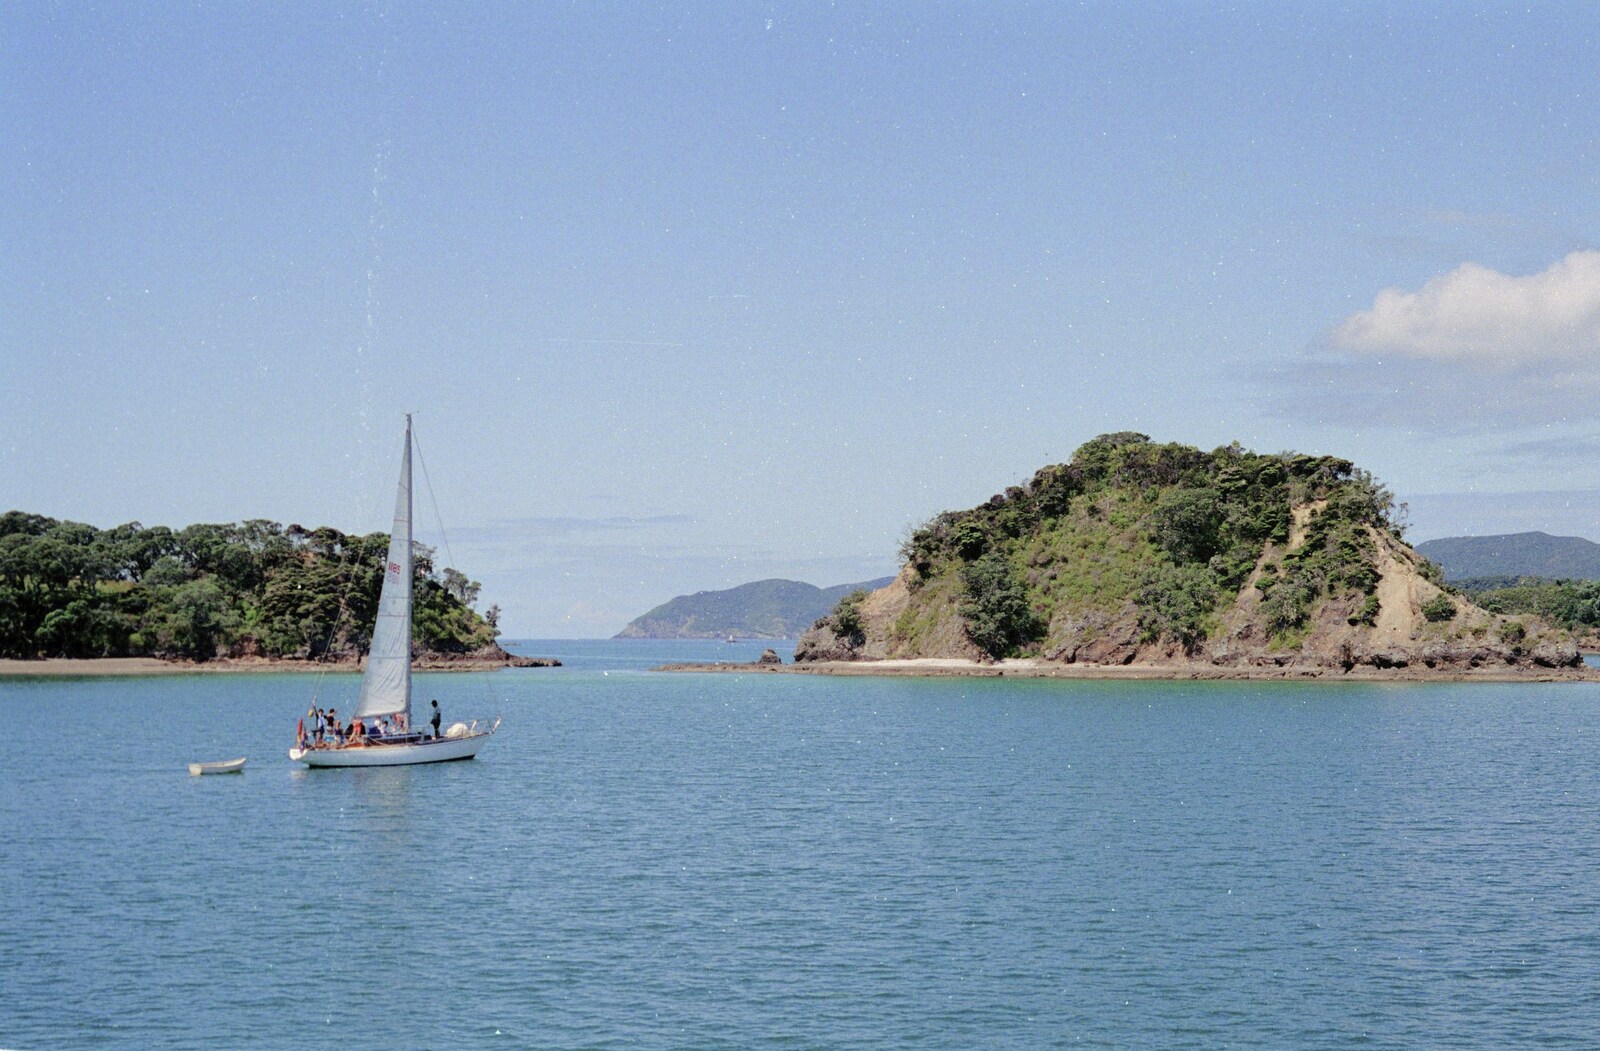 A yacht floats around from The Bay Of Islands, New Zealand - 29th November 1992